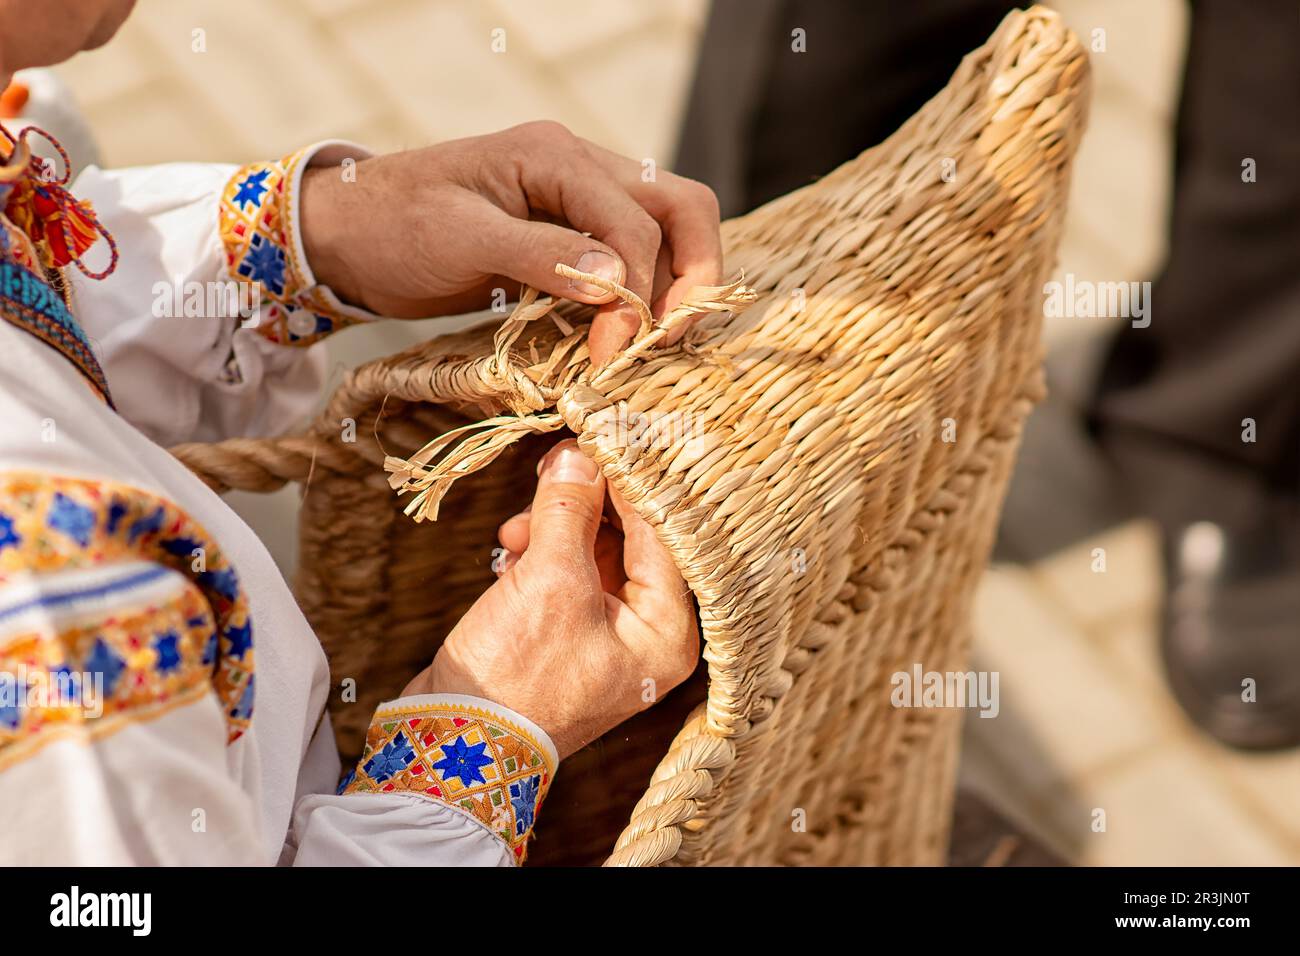 in the photo,the hands of a master in weaving products from a vine, he is weaving a laundry basket, he is wearing a shirt sewn and embroidered by hand Stock Photo